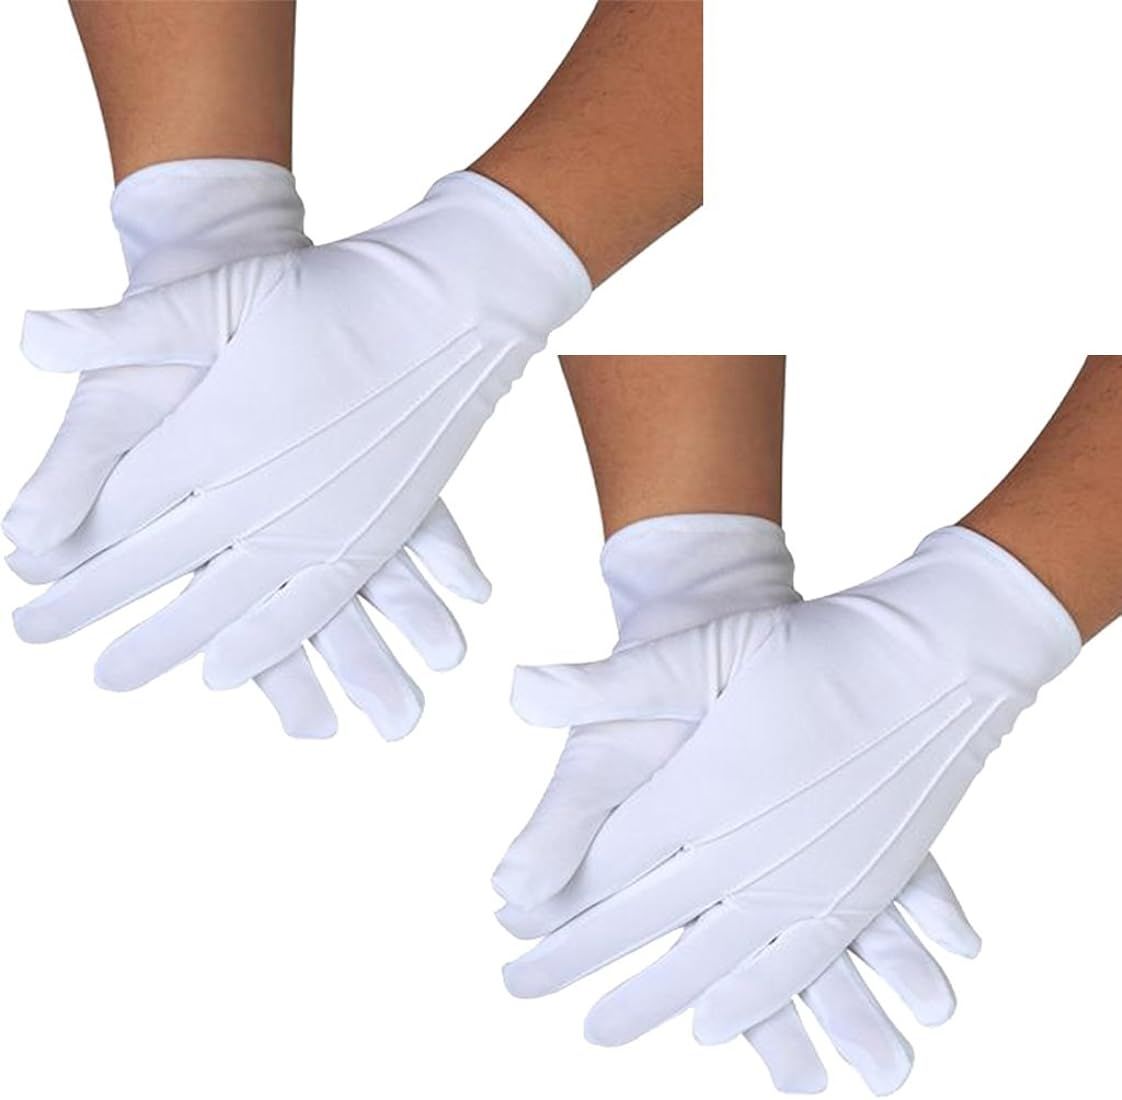 DreamHigh DH 2 Pairs White Cotton/Nylon Marching Gloves, Formal Tuxedo Honor Guard Parade Gloves | Amazon (US)